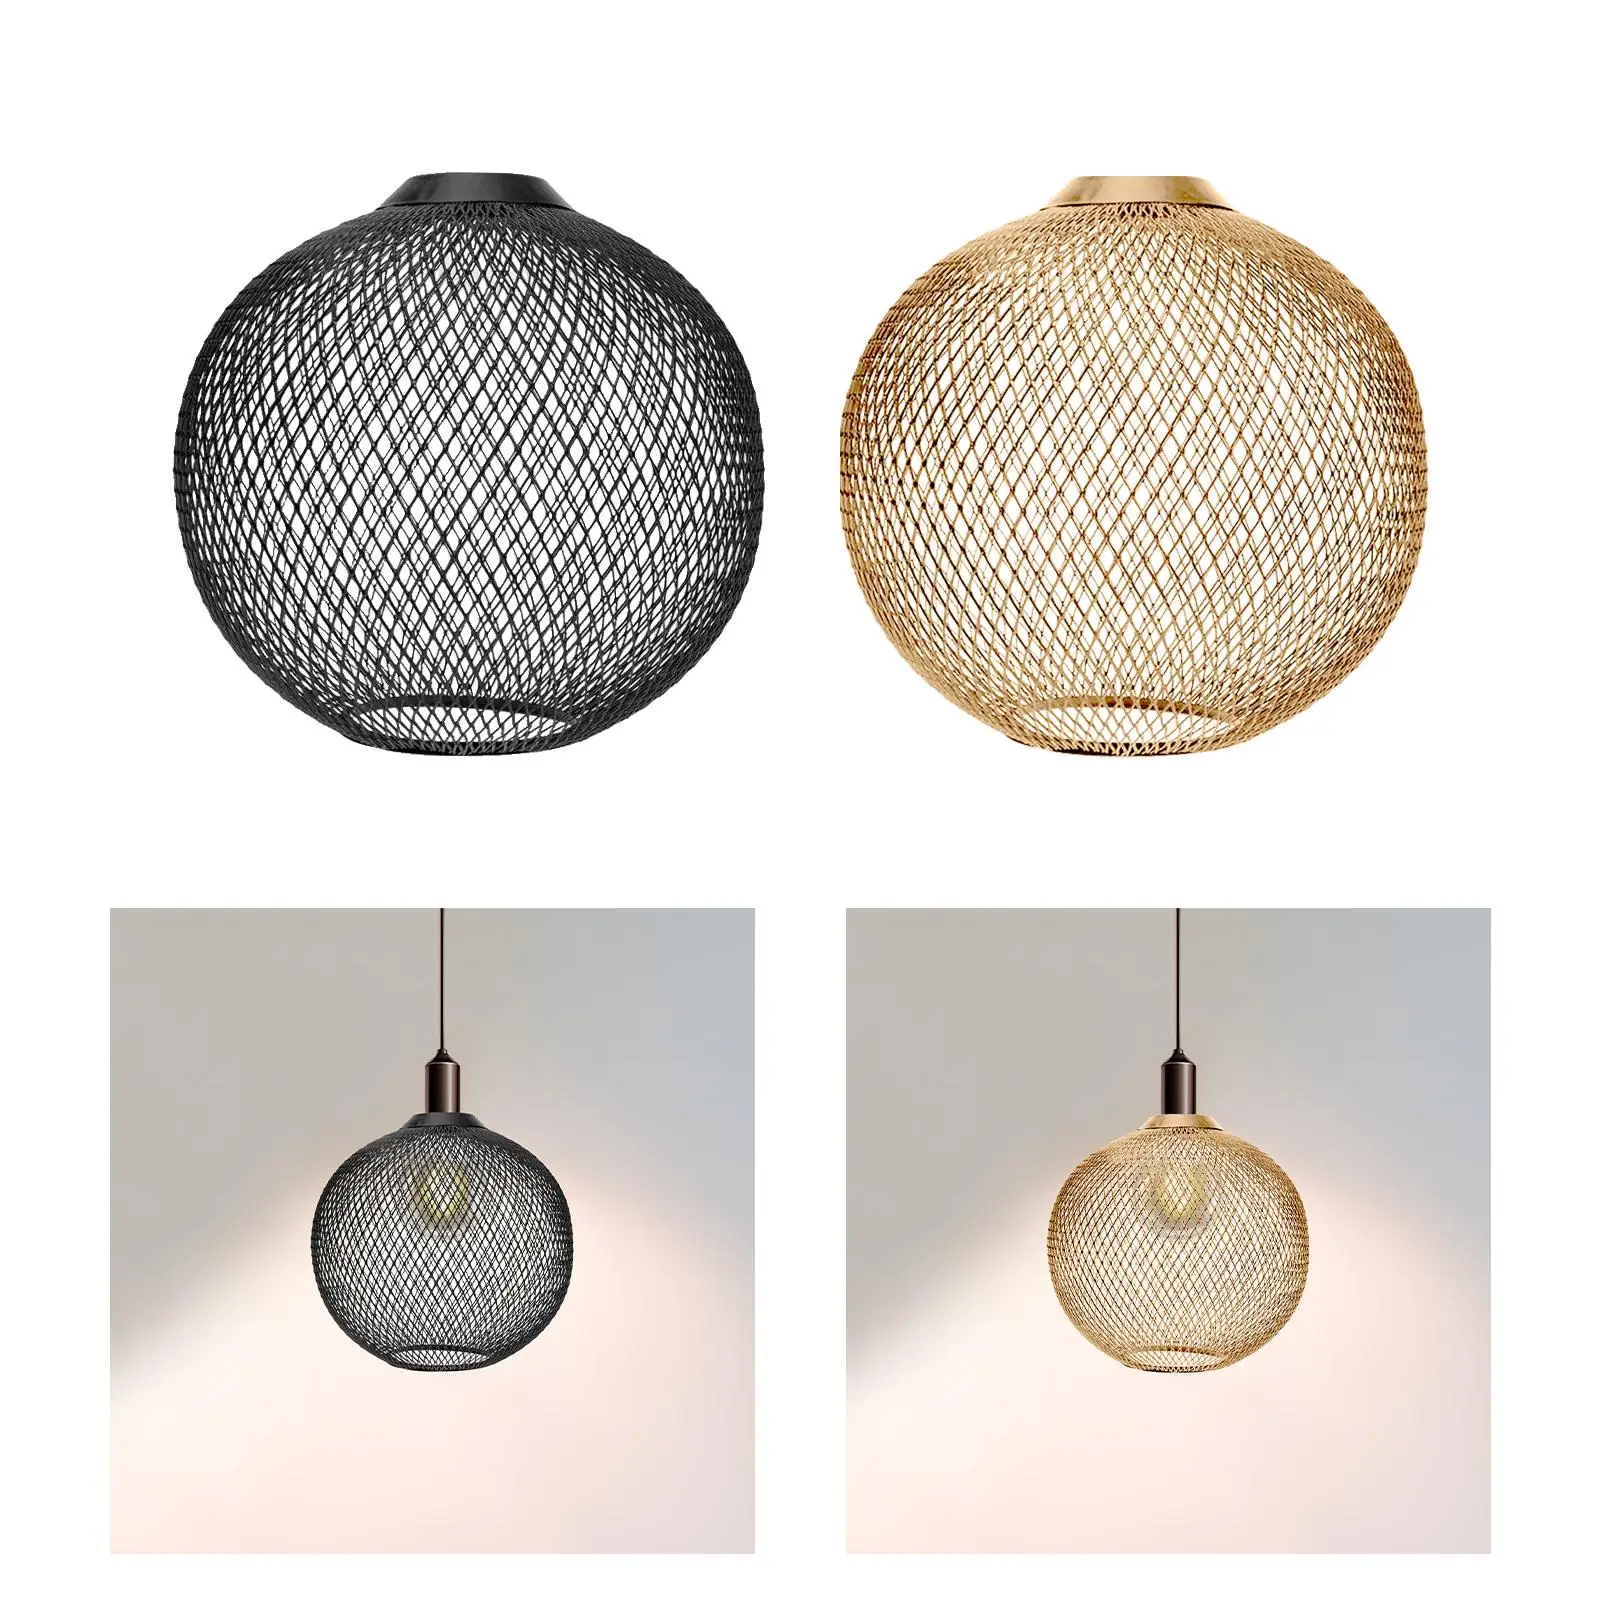 Metal Pendant Lamp Shade Hanging Light Cover Chandelier Retro Style Bulb Guard Lampshade for Teahouse Kitchen Island Hotel Decor